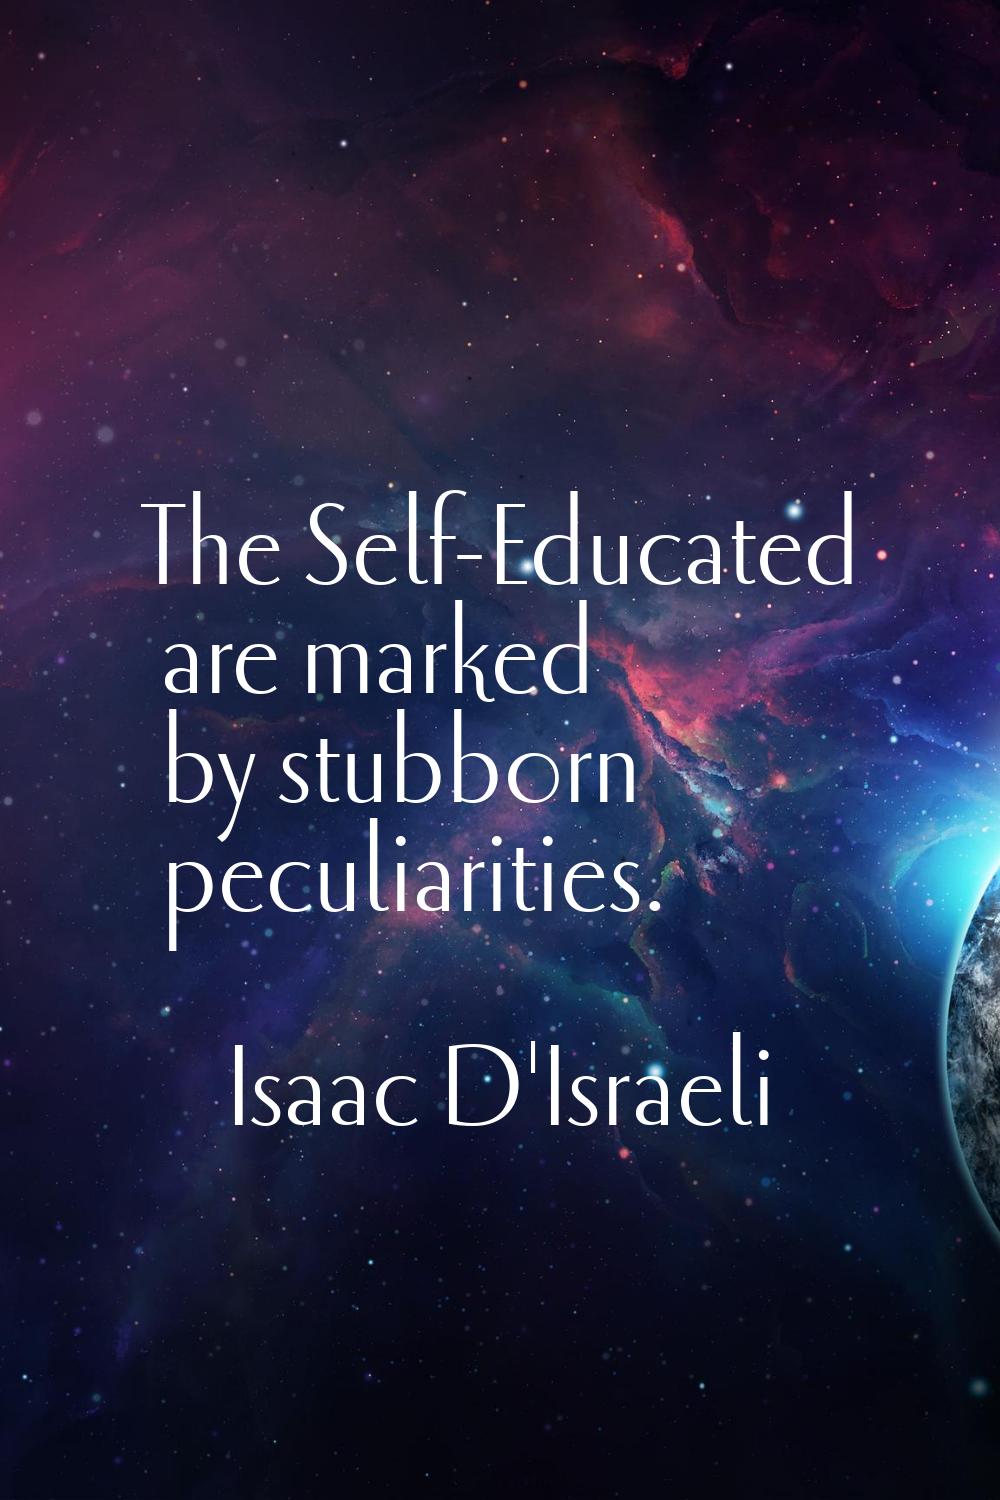 The Self-Educated are marked by stubborn peculiarities.